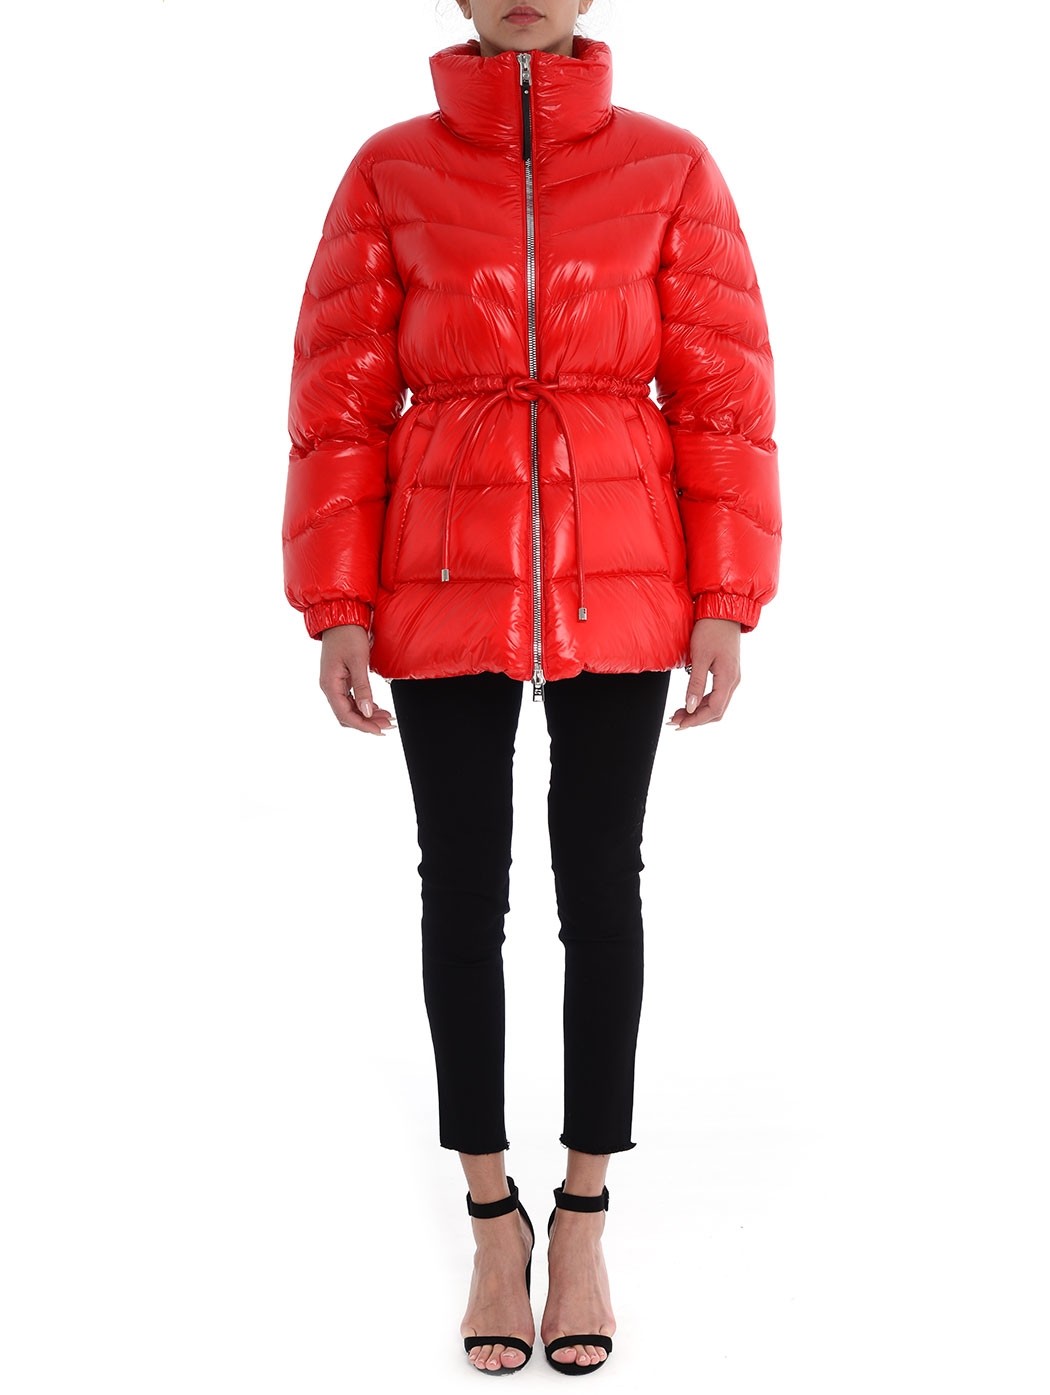  down jackets,removable hoods,WOMEN DOWN JACKETS,MONCLER PADDED JACKETS,WOOLRICH ARCTIC PARKA,HERNO DOWN JACKETS  WOOLRICH WWOU0718FR